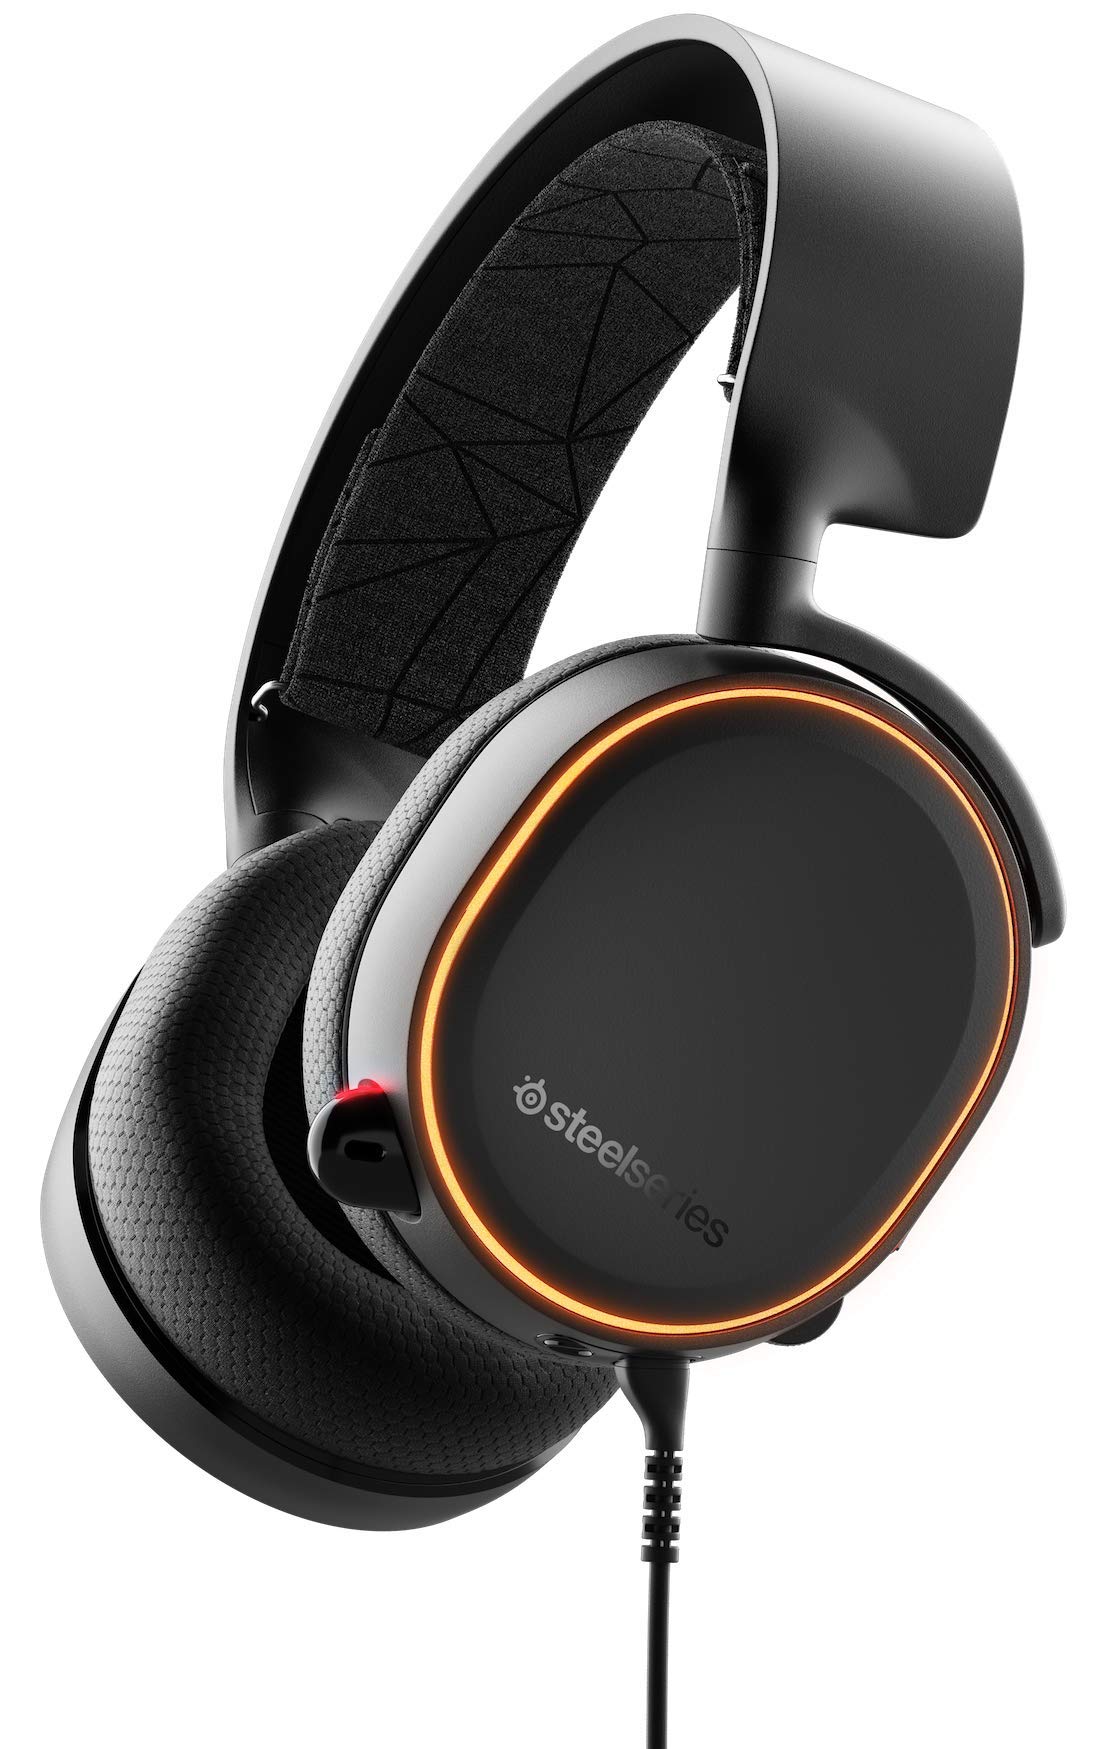 SteelSeries Arctis 5 Gaming Headset - RGB Illumination - DTS Headphone: X v2.0 Surround for PC and PlayStation 5, PS4 - Black